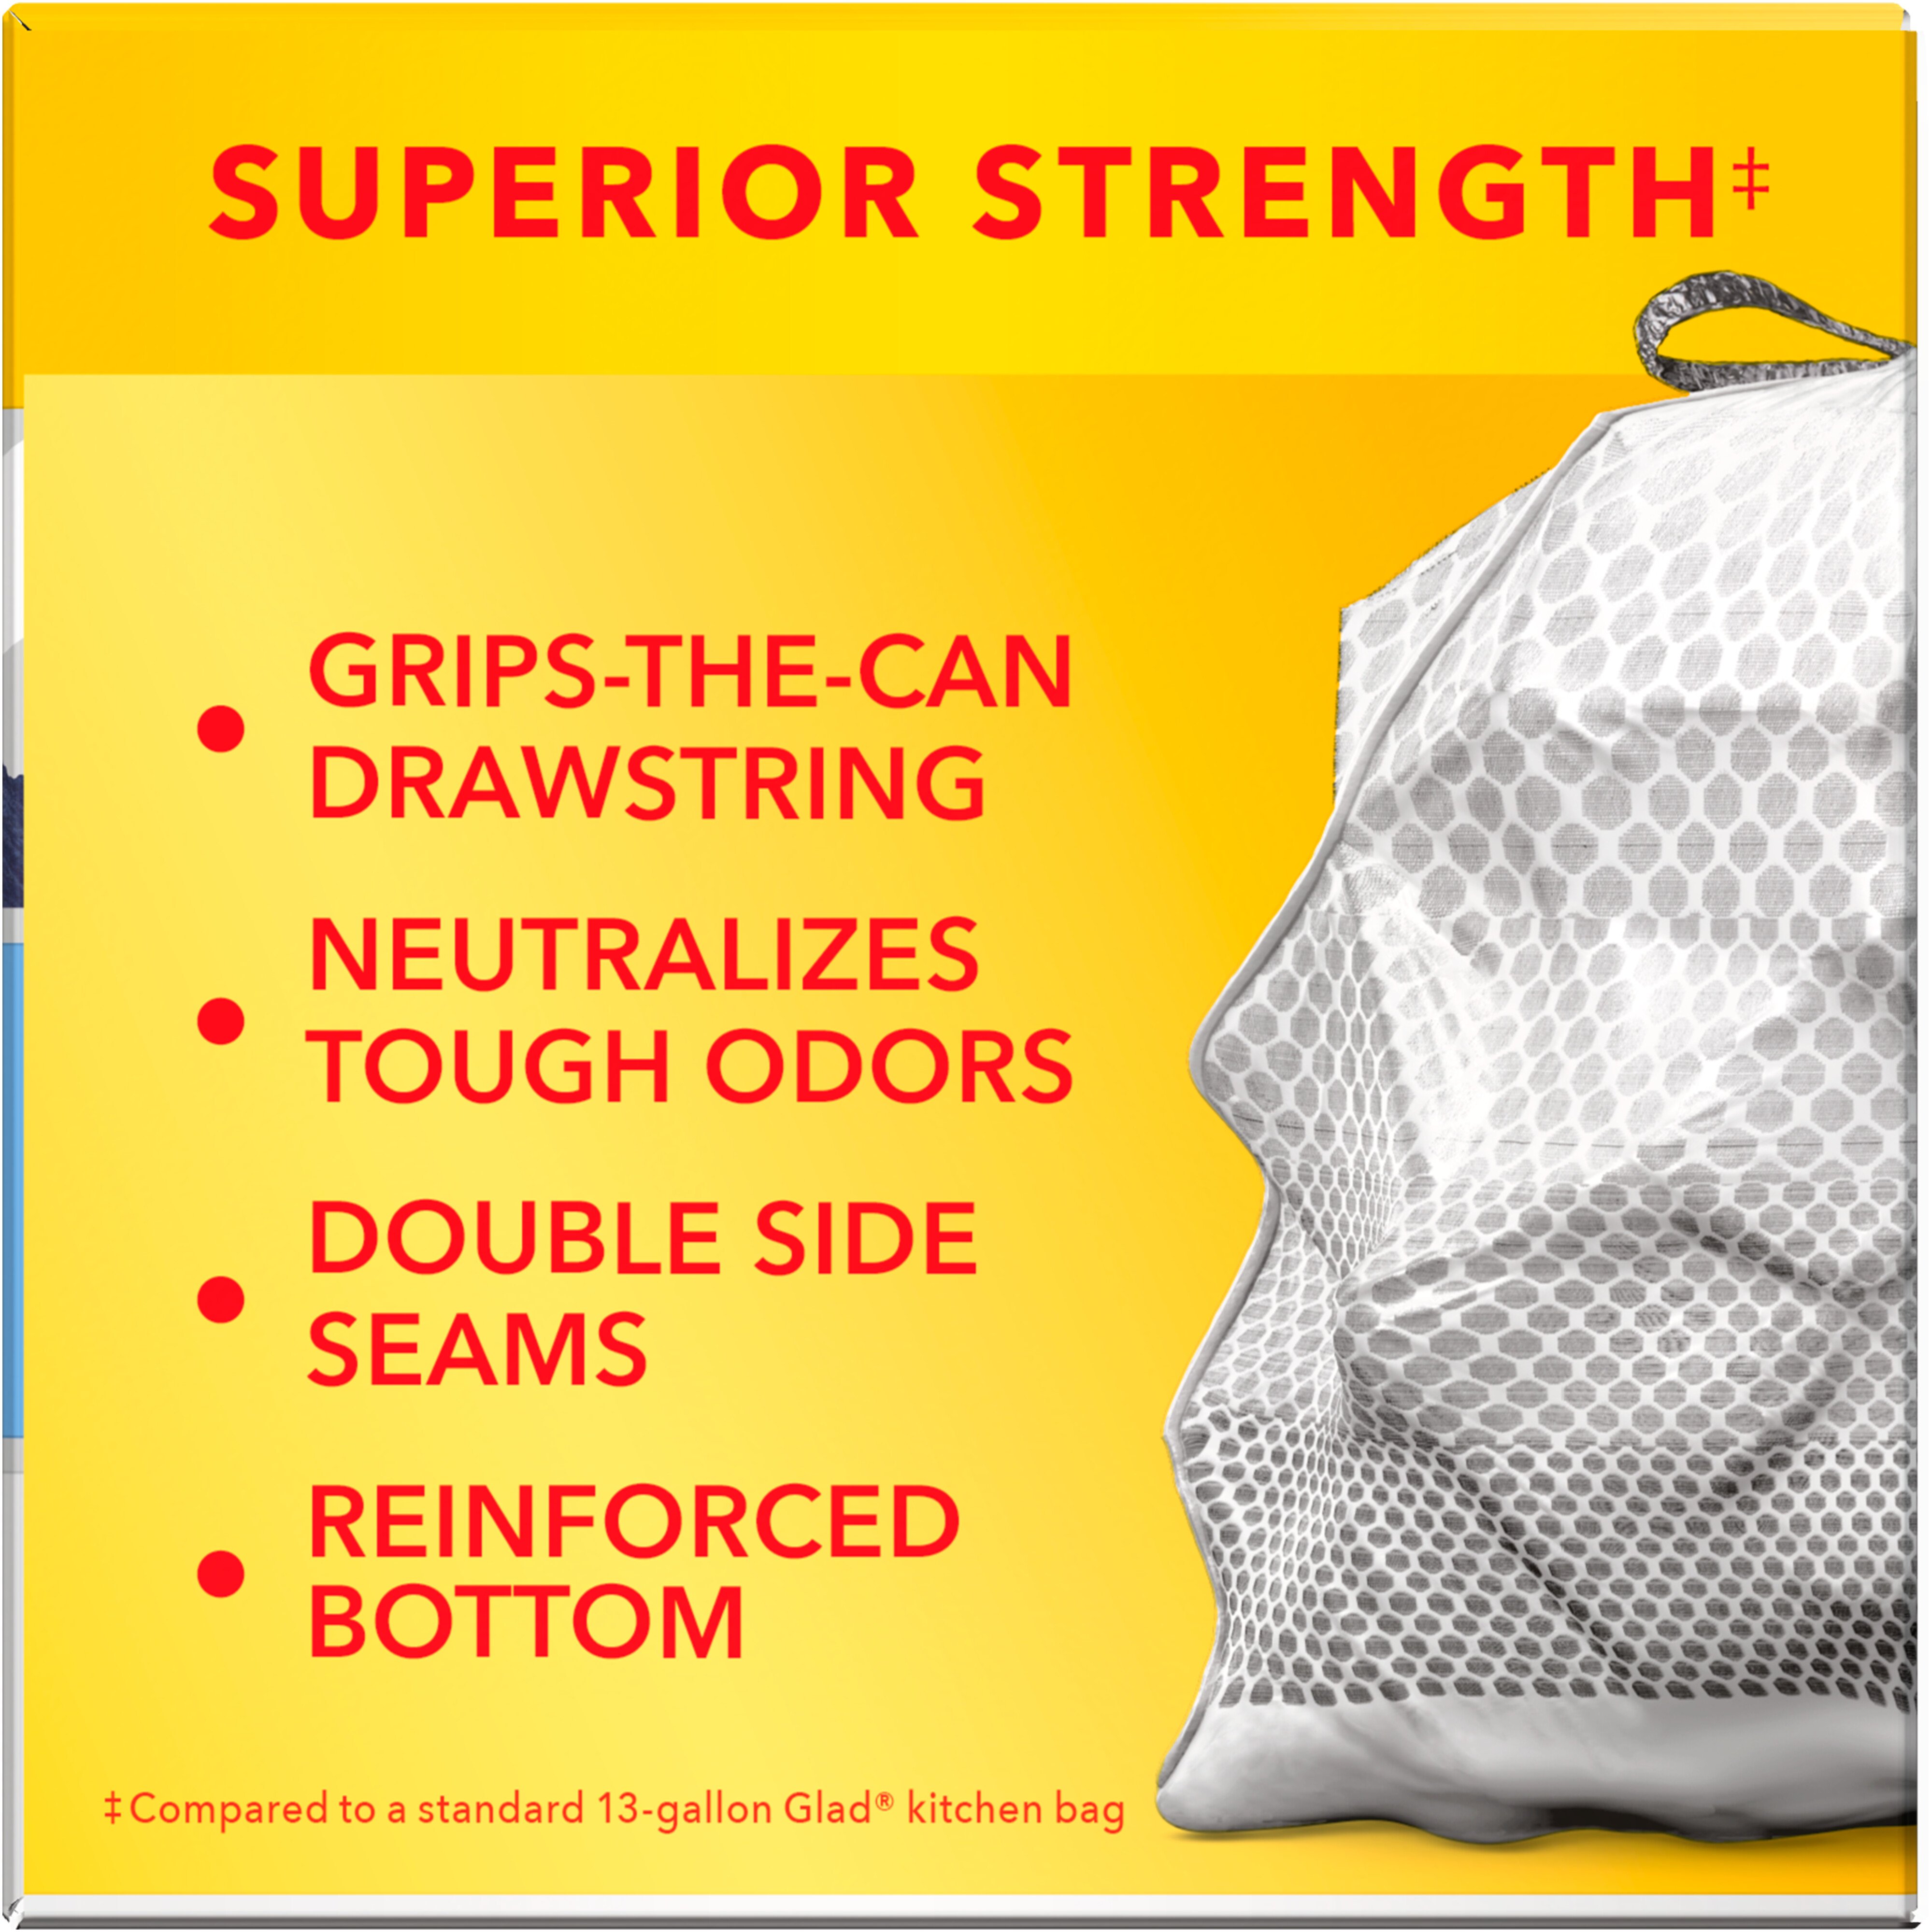 ForceFlex MaxStrength™ with Clorox® Bags